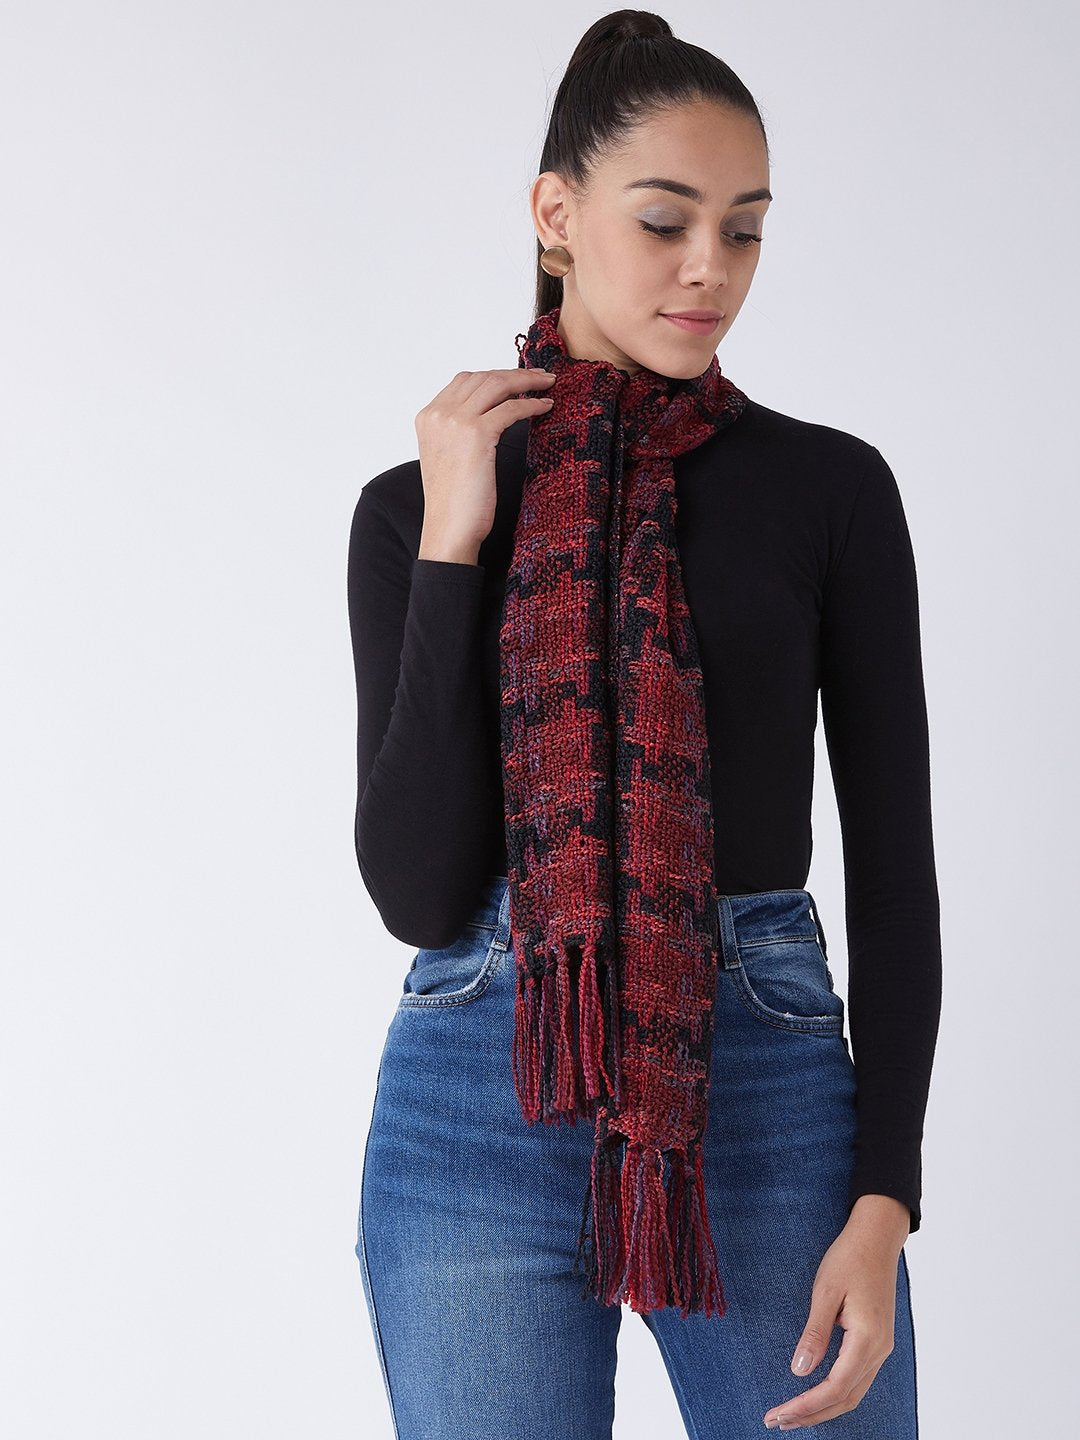 Maroon and Black Winter Stole